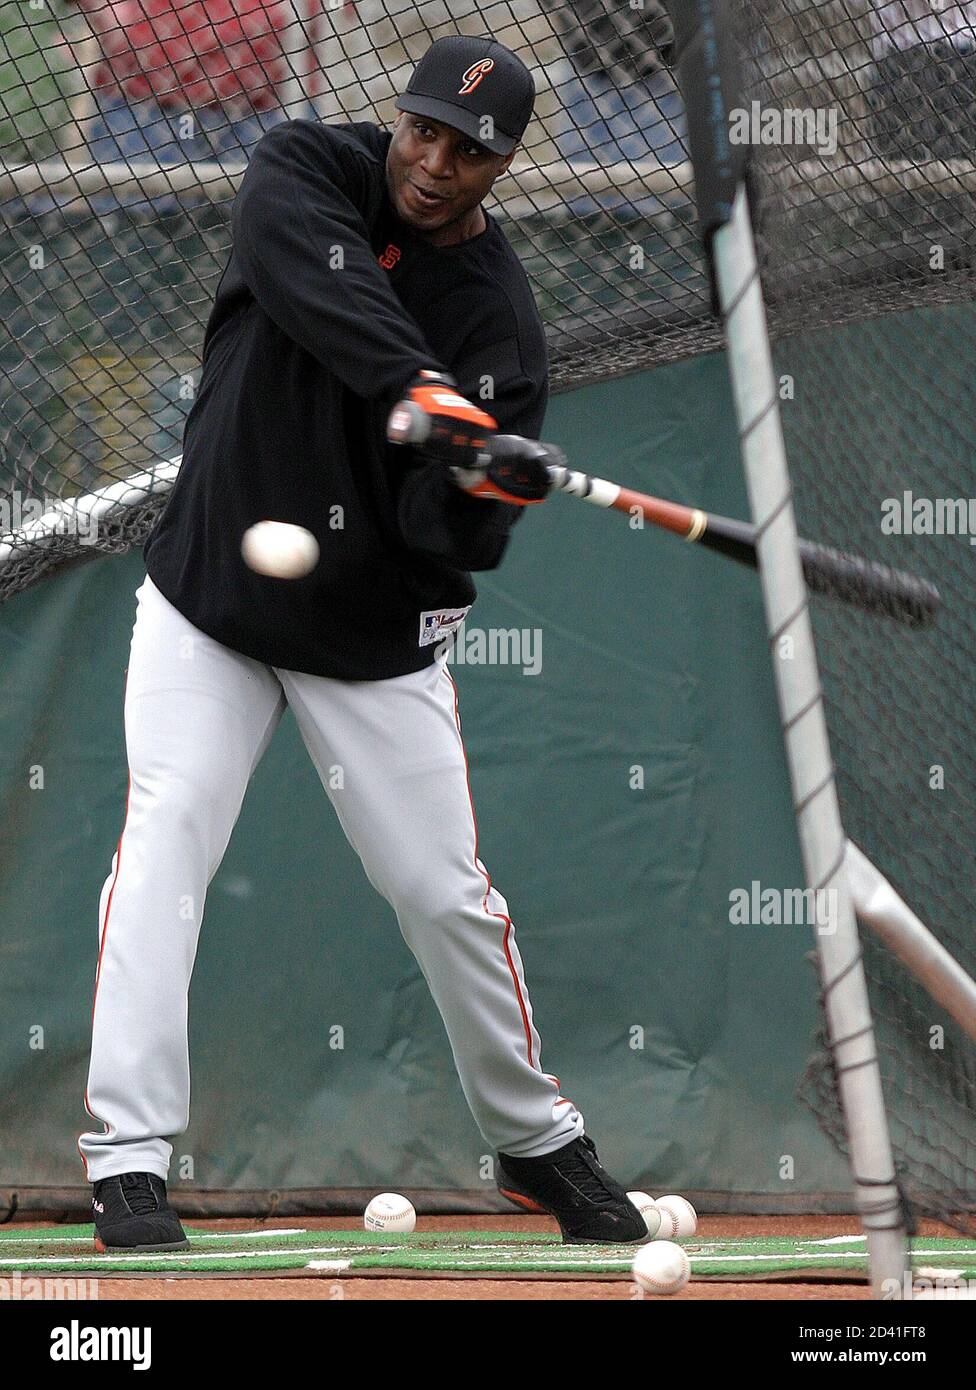 San Francisco Giants star Barry Bonds takes batting practice at their  spring training camp in Scottsdale, Arizona, February 27, 2004. Bonds  enters the 2004 season just two home runs shy of catching